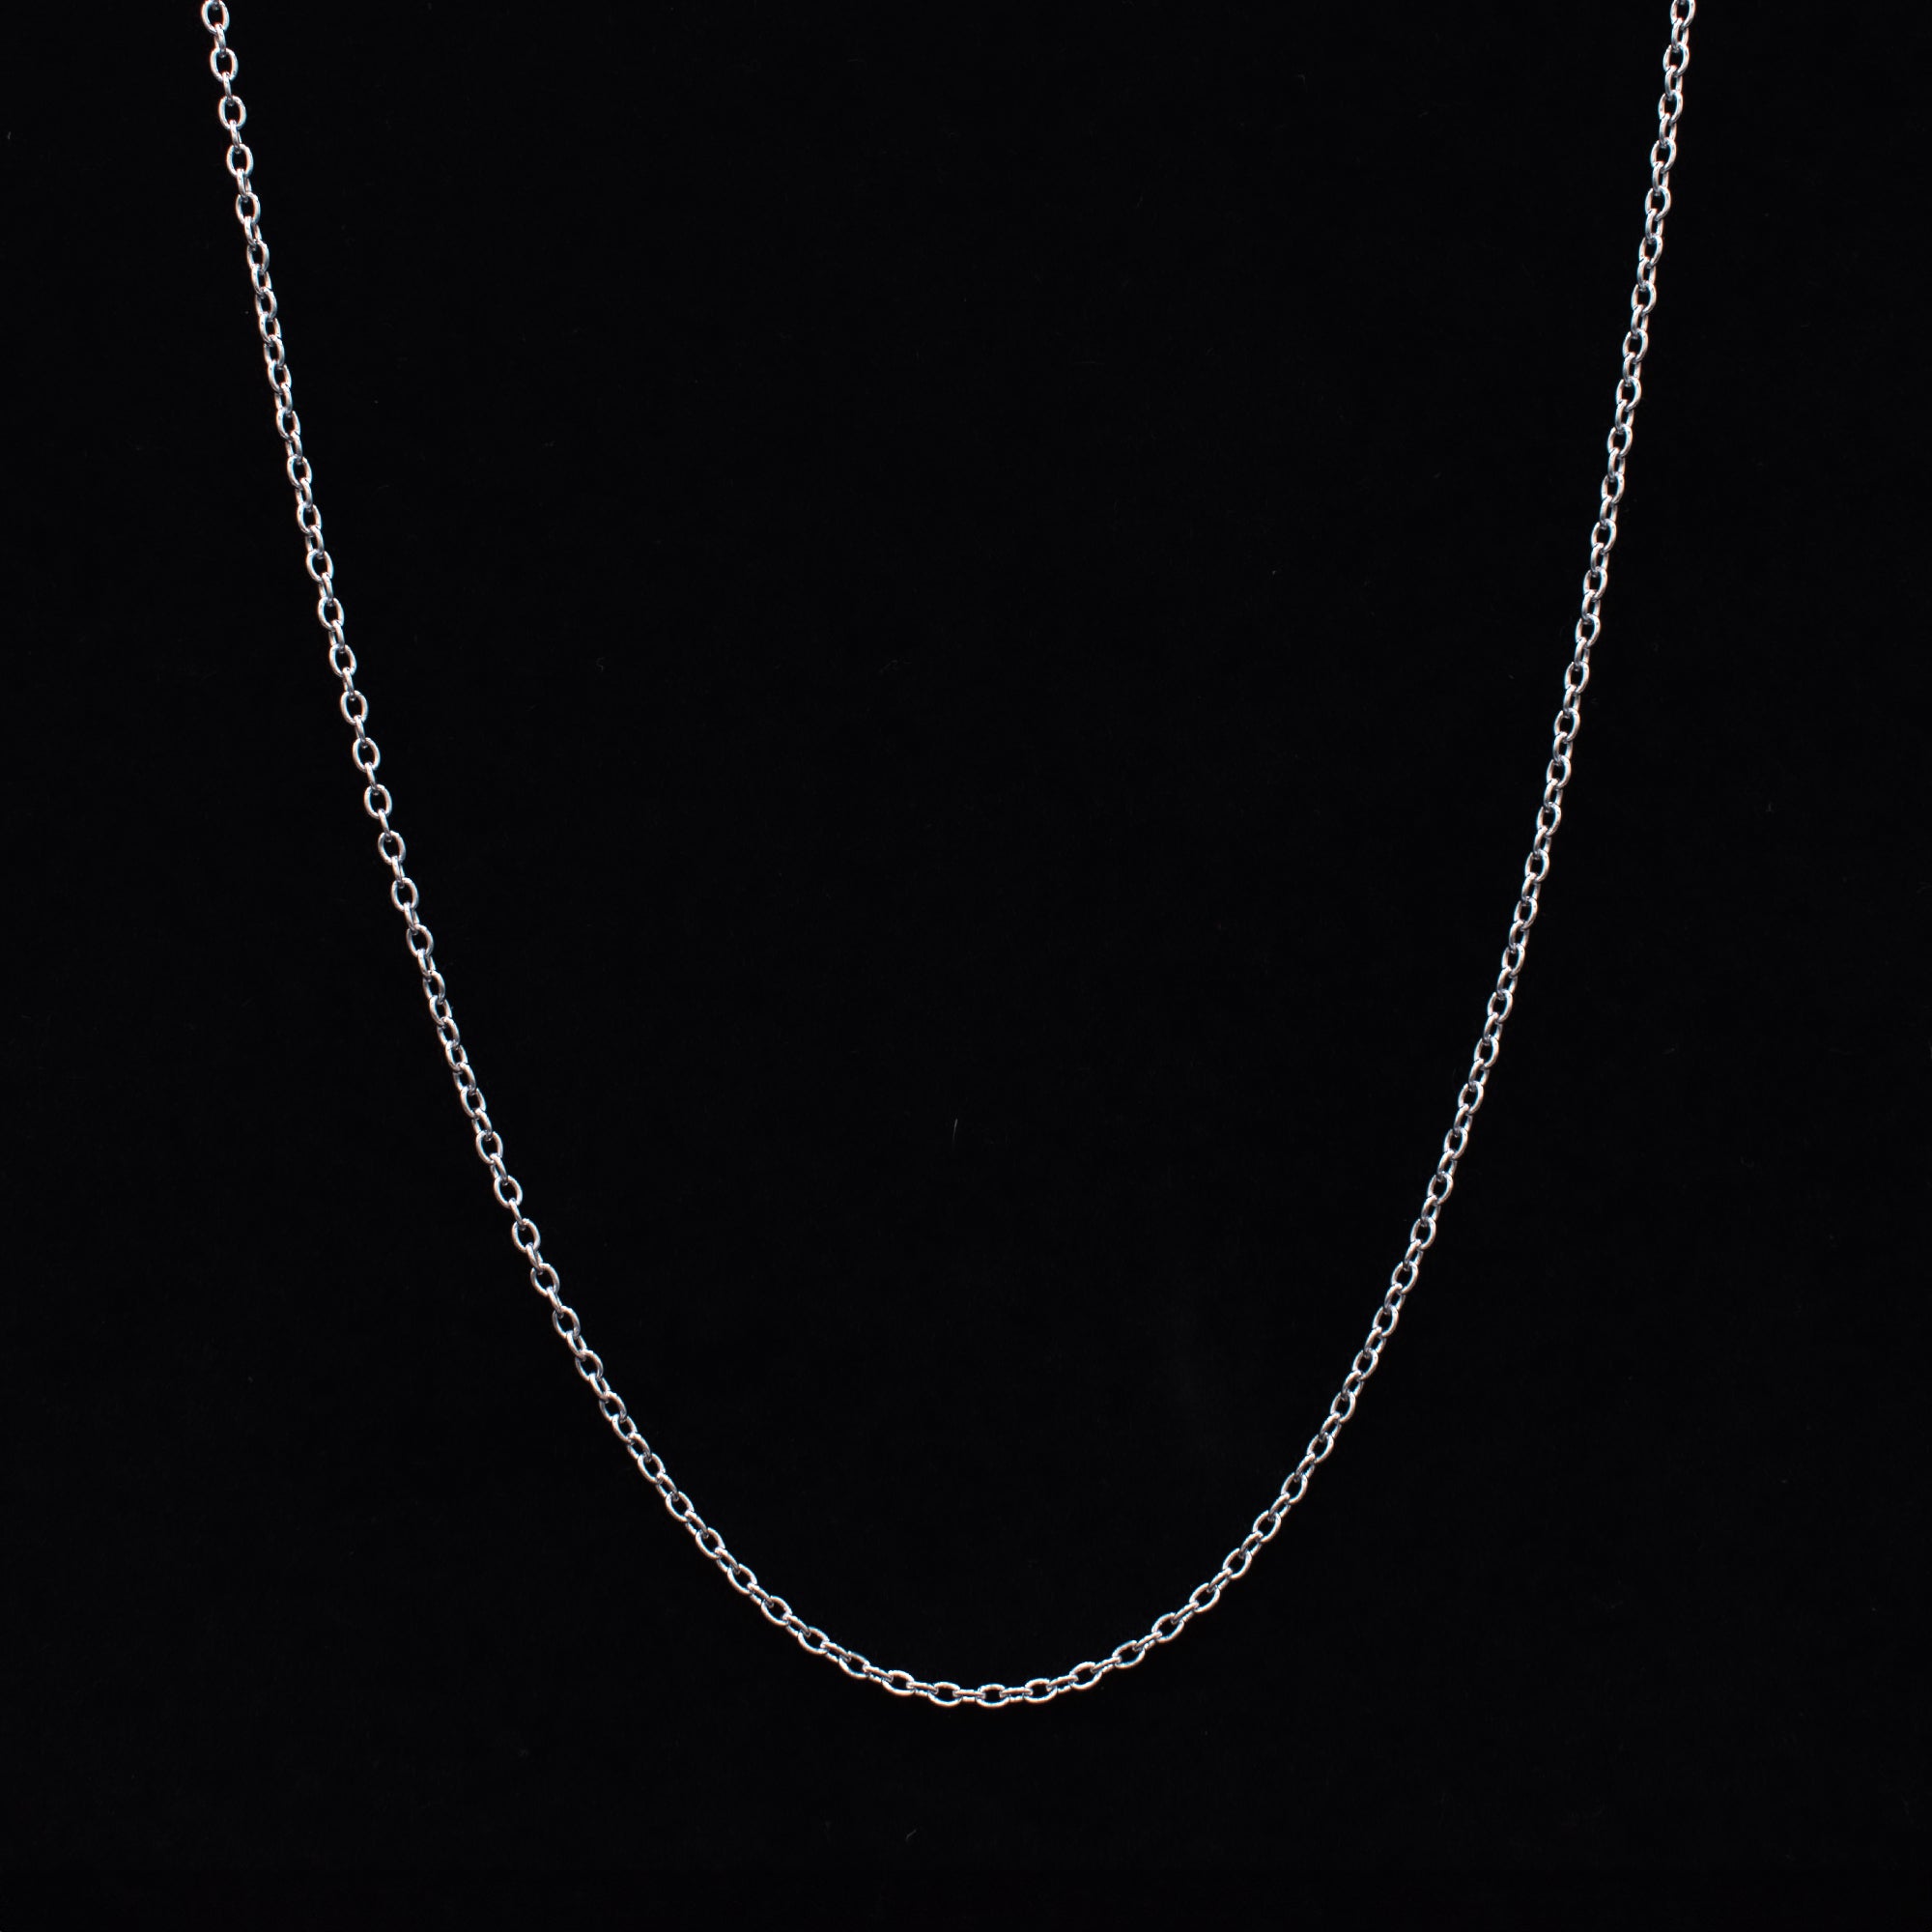 Cable Chain Necklace - (Silver) 2mm